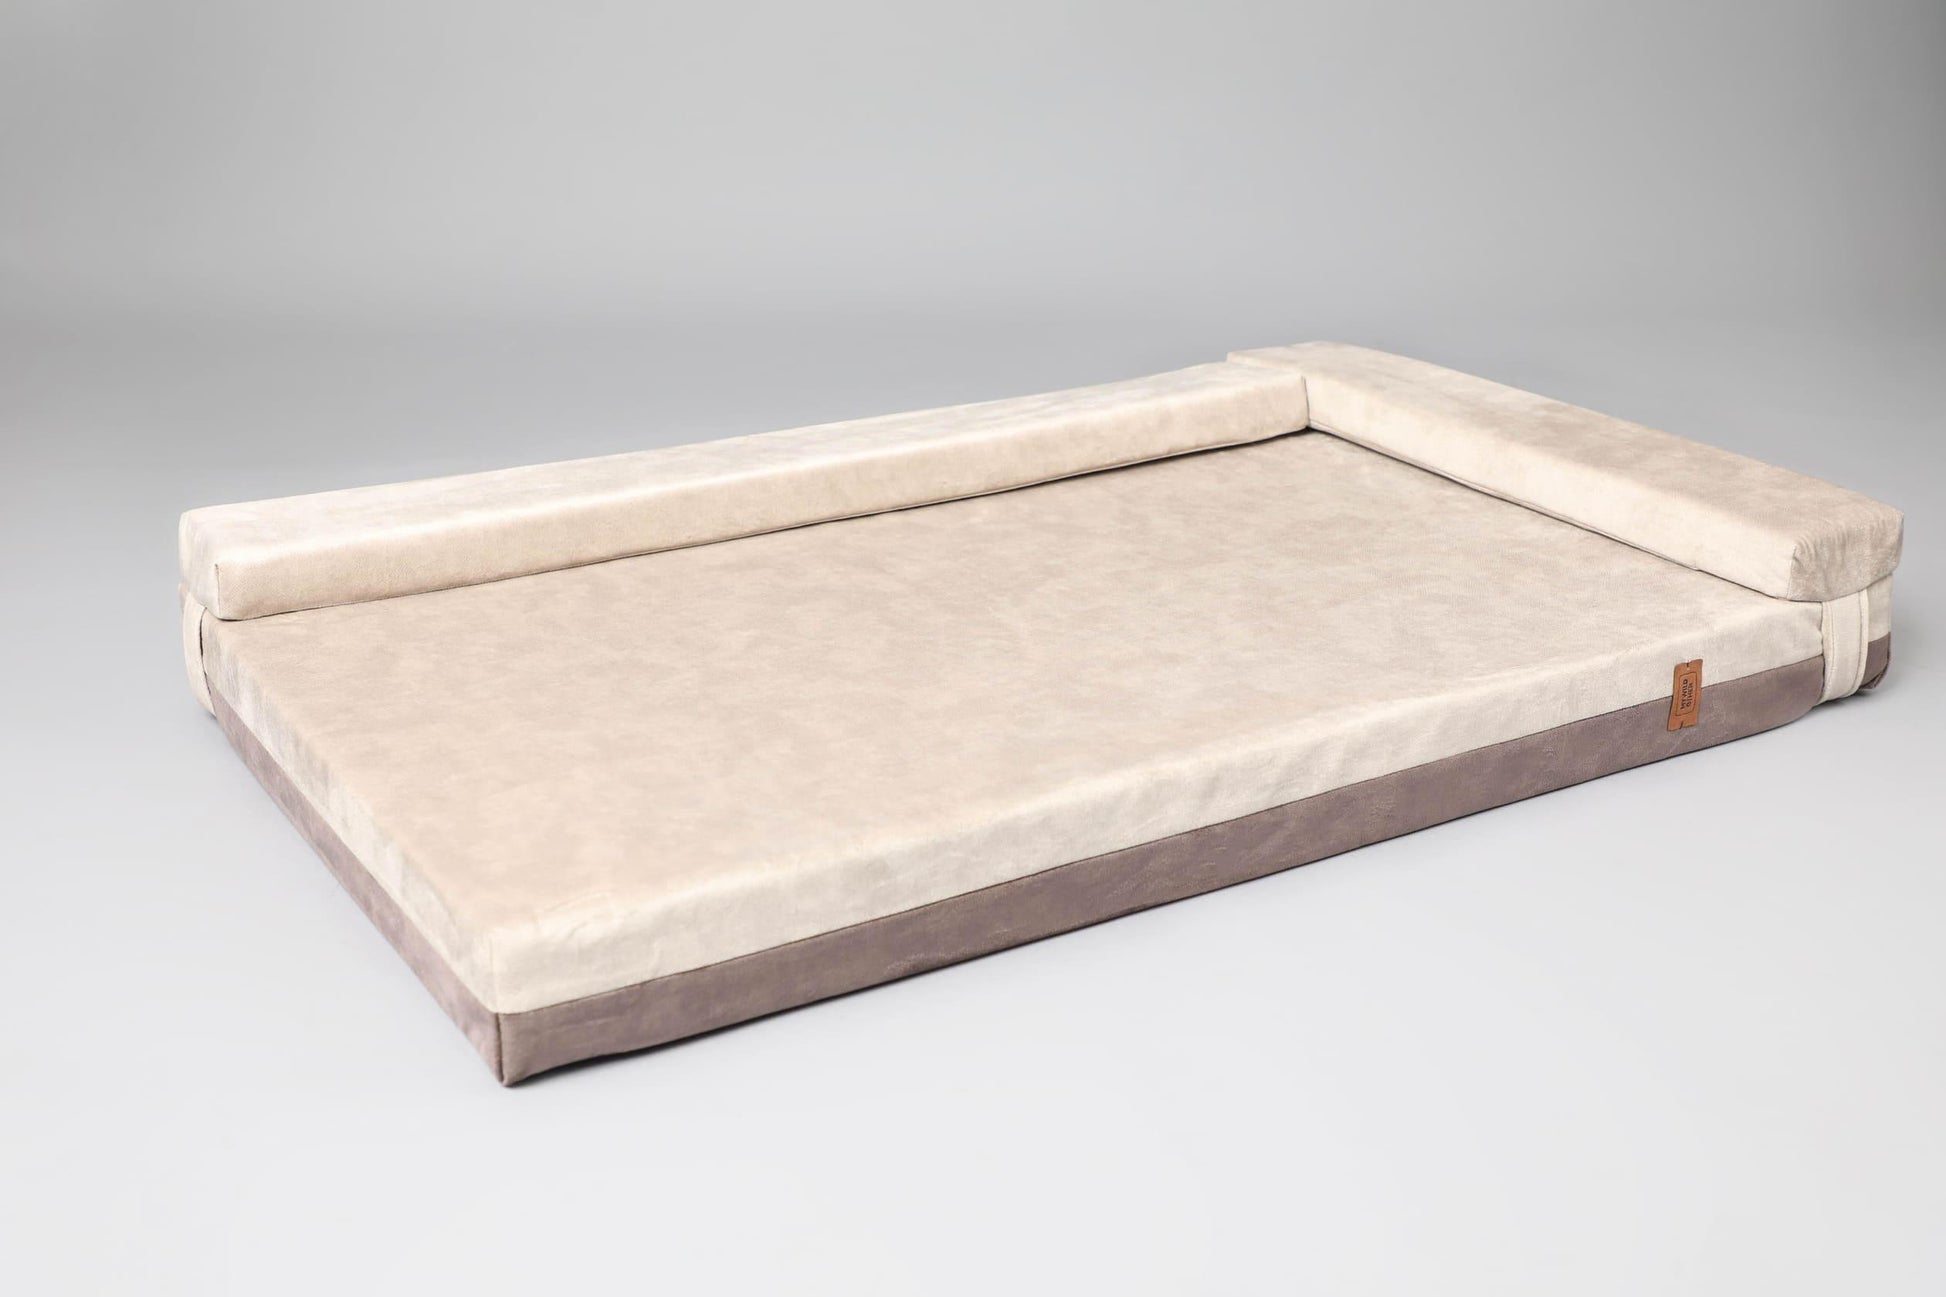 2-sided transformer dog bed. BEIGE+TAUPE - European handmade dog accessories by My Wild Other